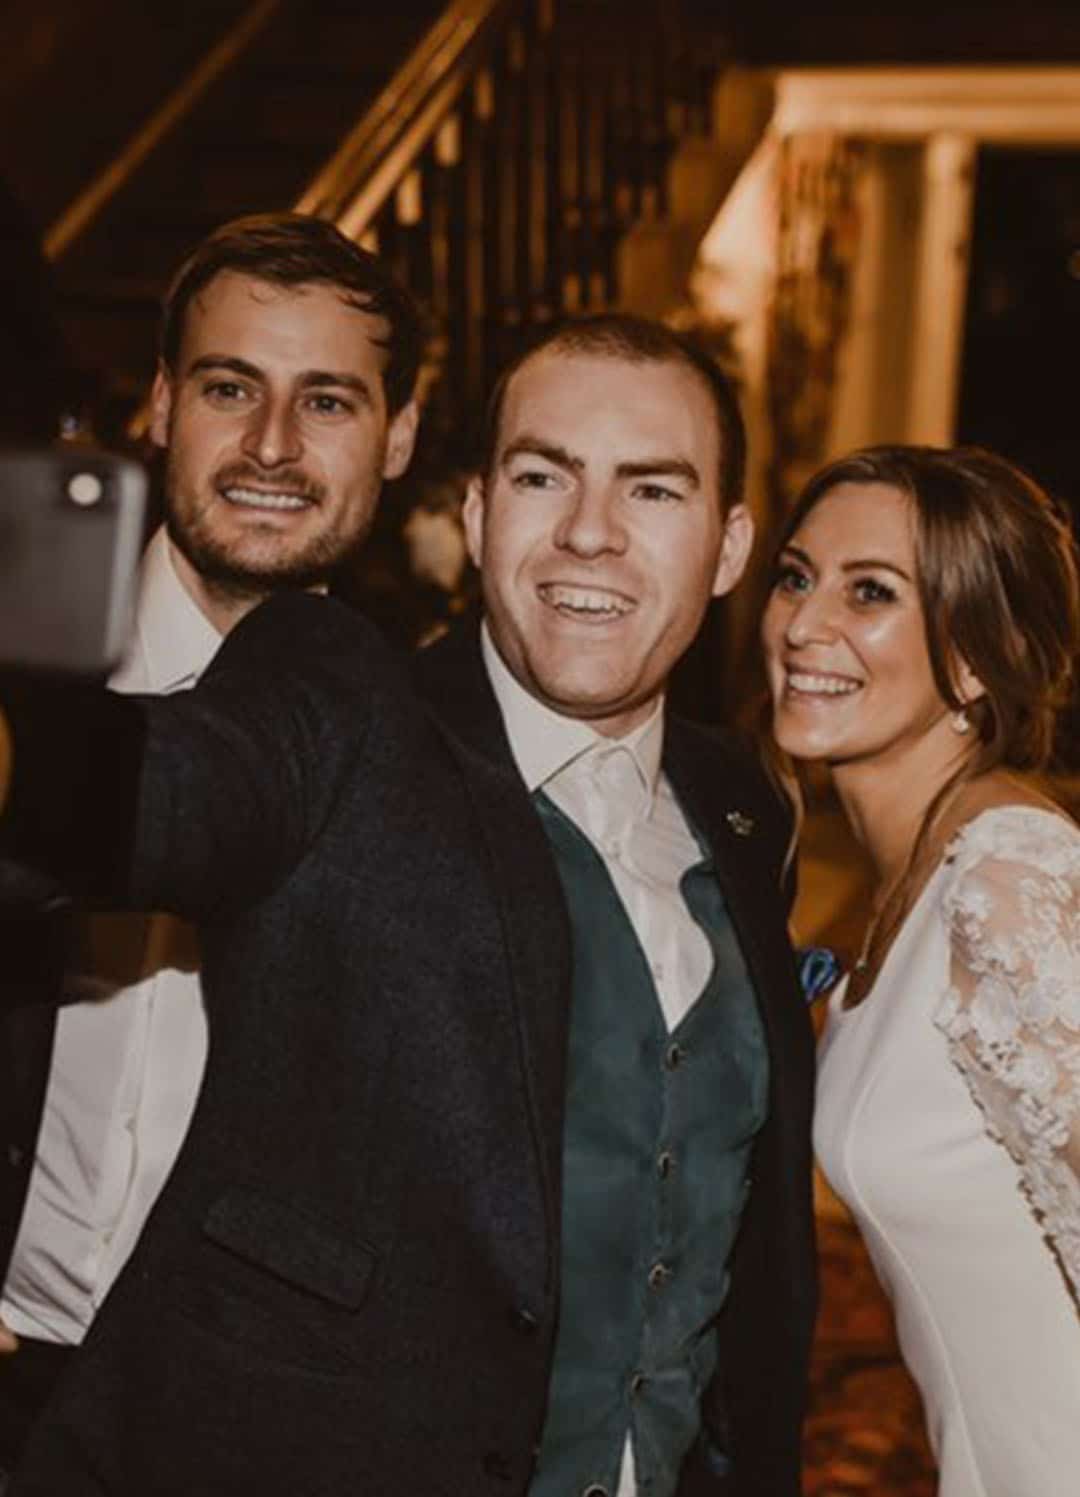 SAM FITTON wedding magician with bride and groom at iscoyd park wedding